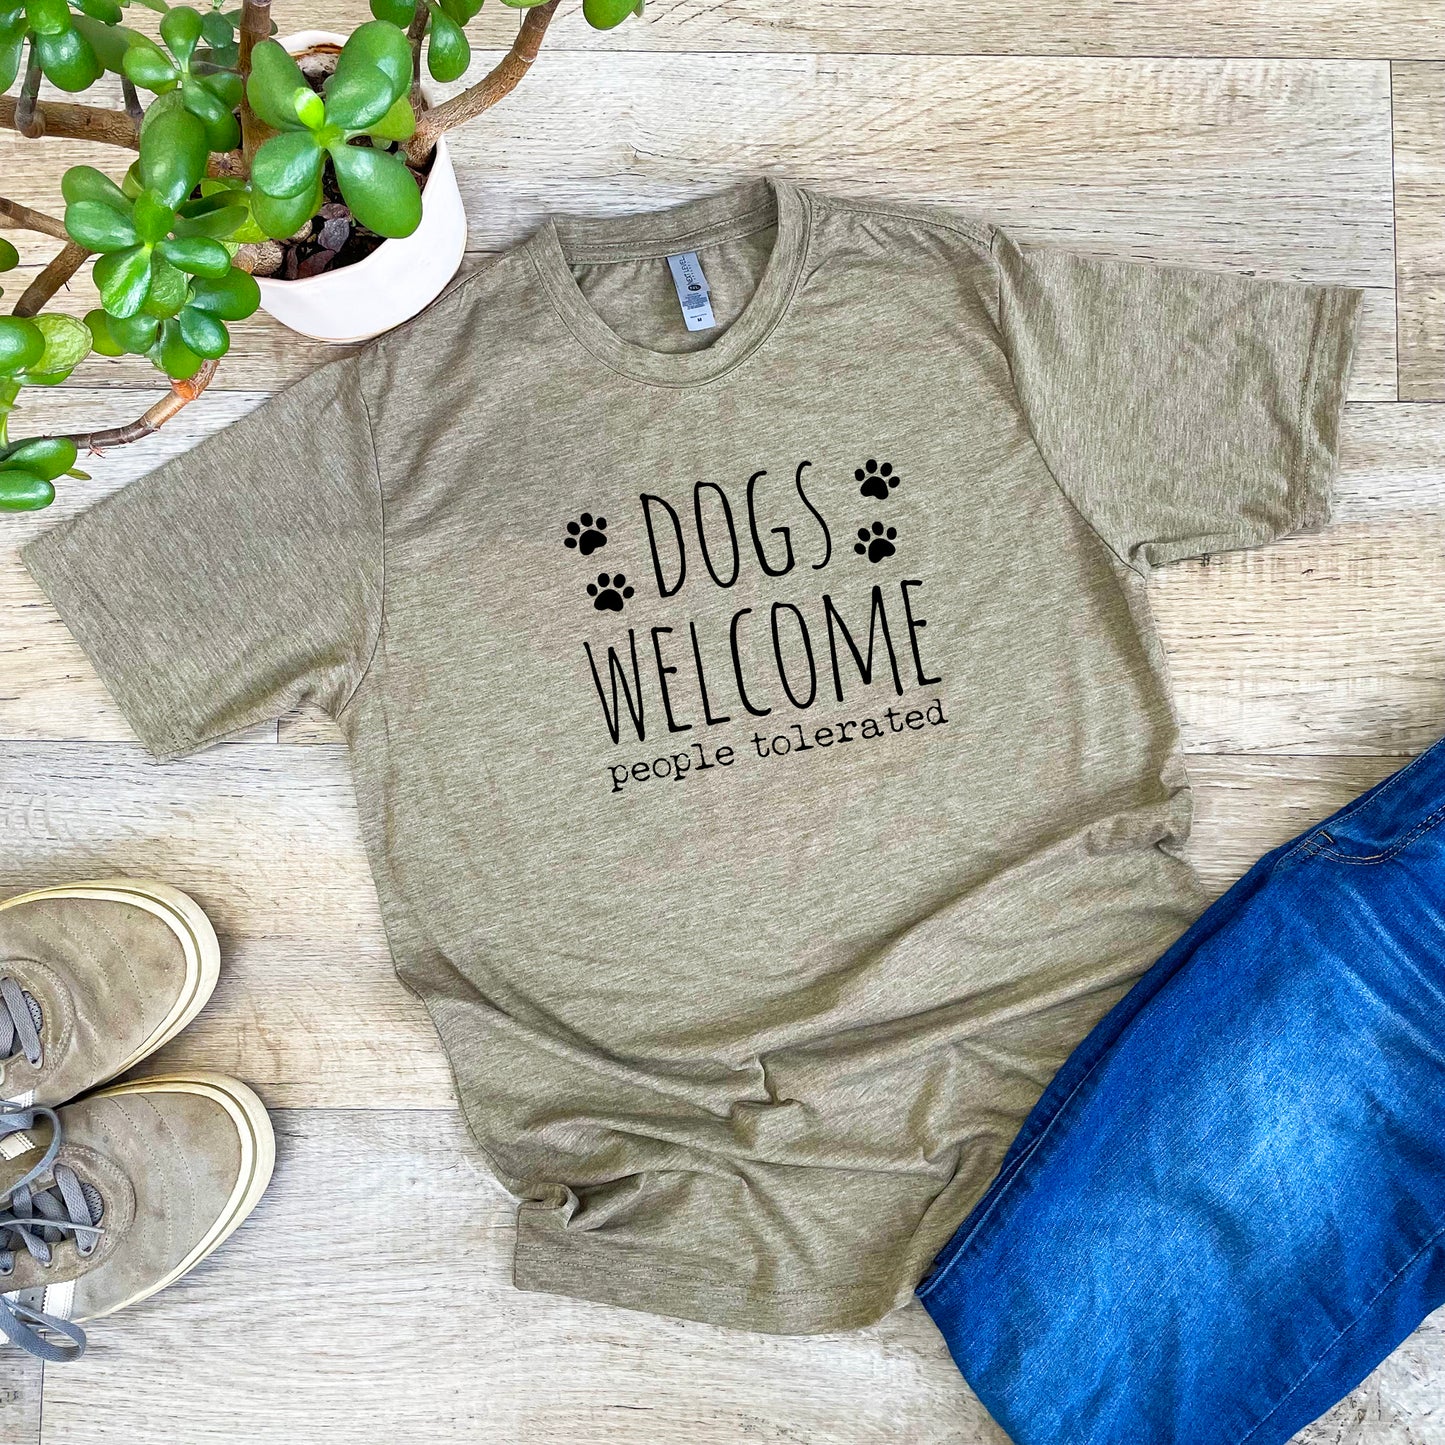 Dogs Welcome, People Tolerated - Men's / Unisex Tee - Stonewash Blue or Sage